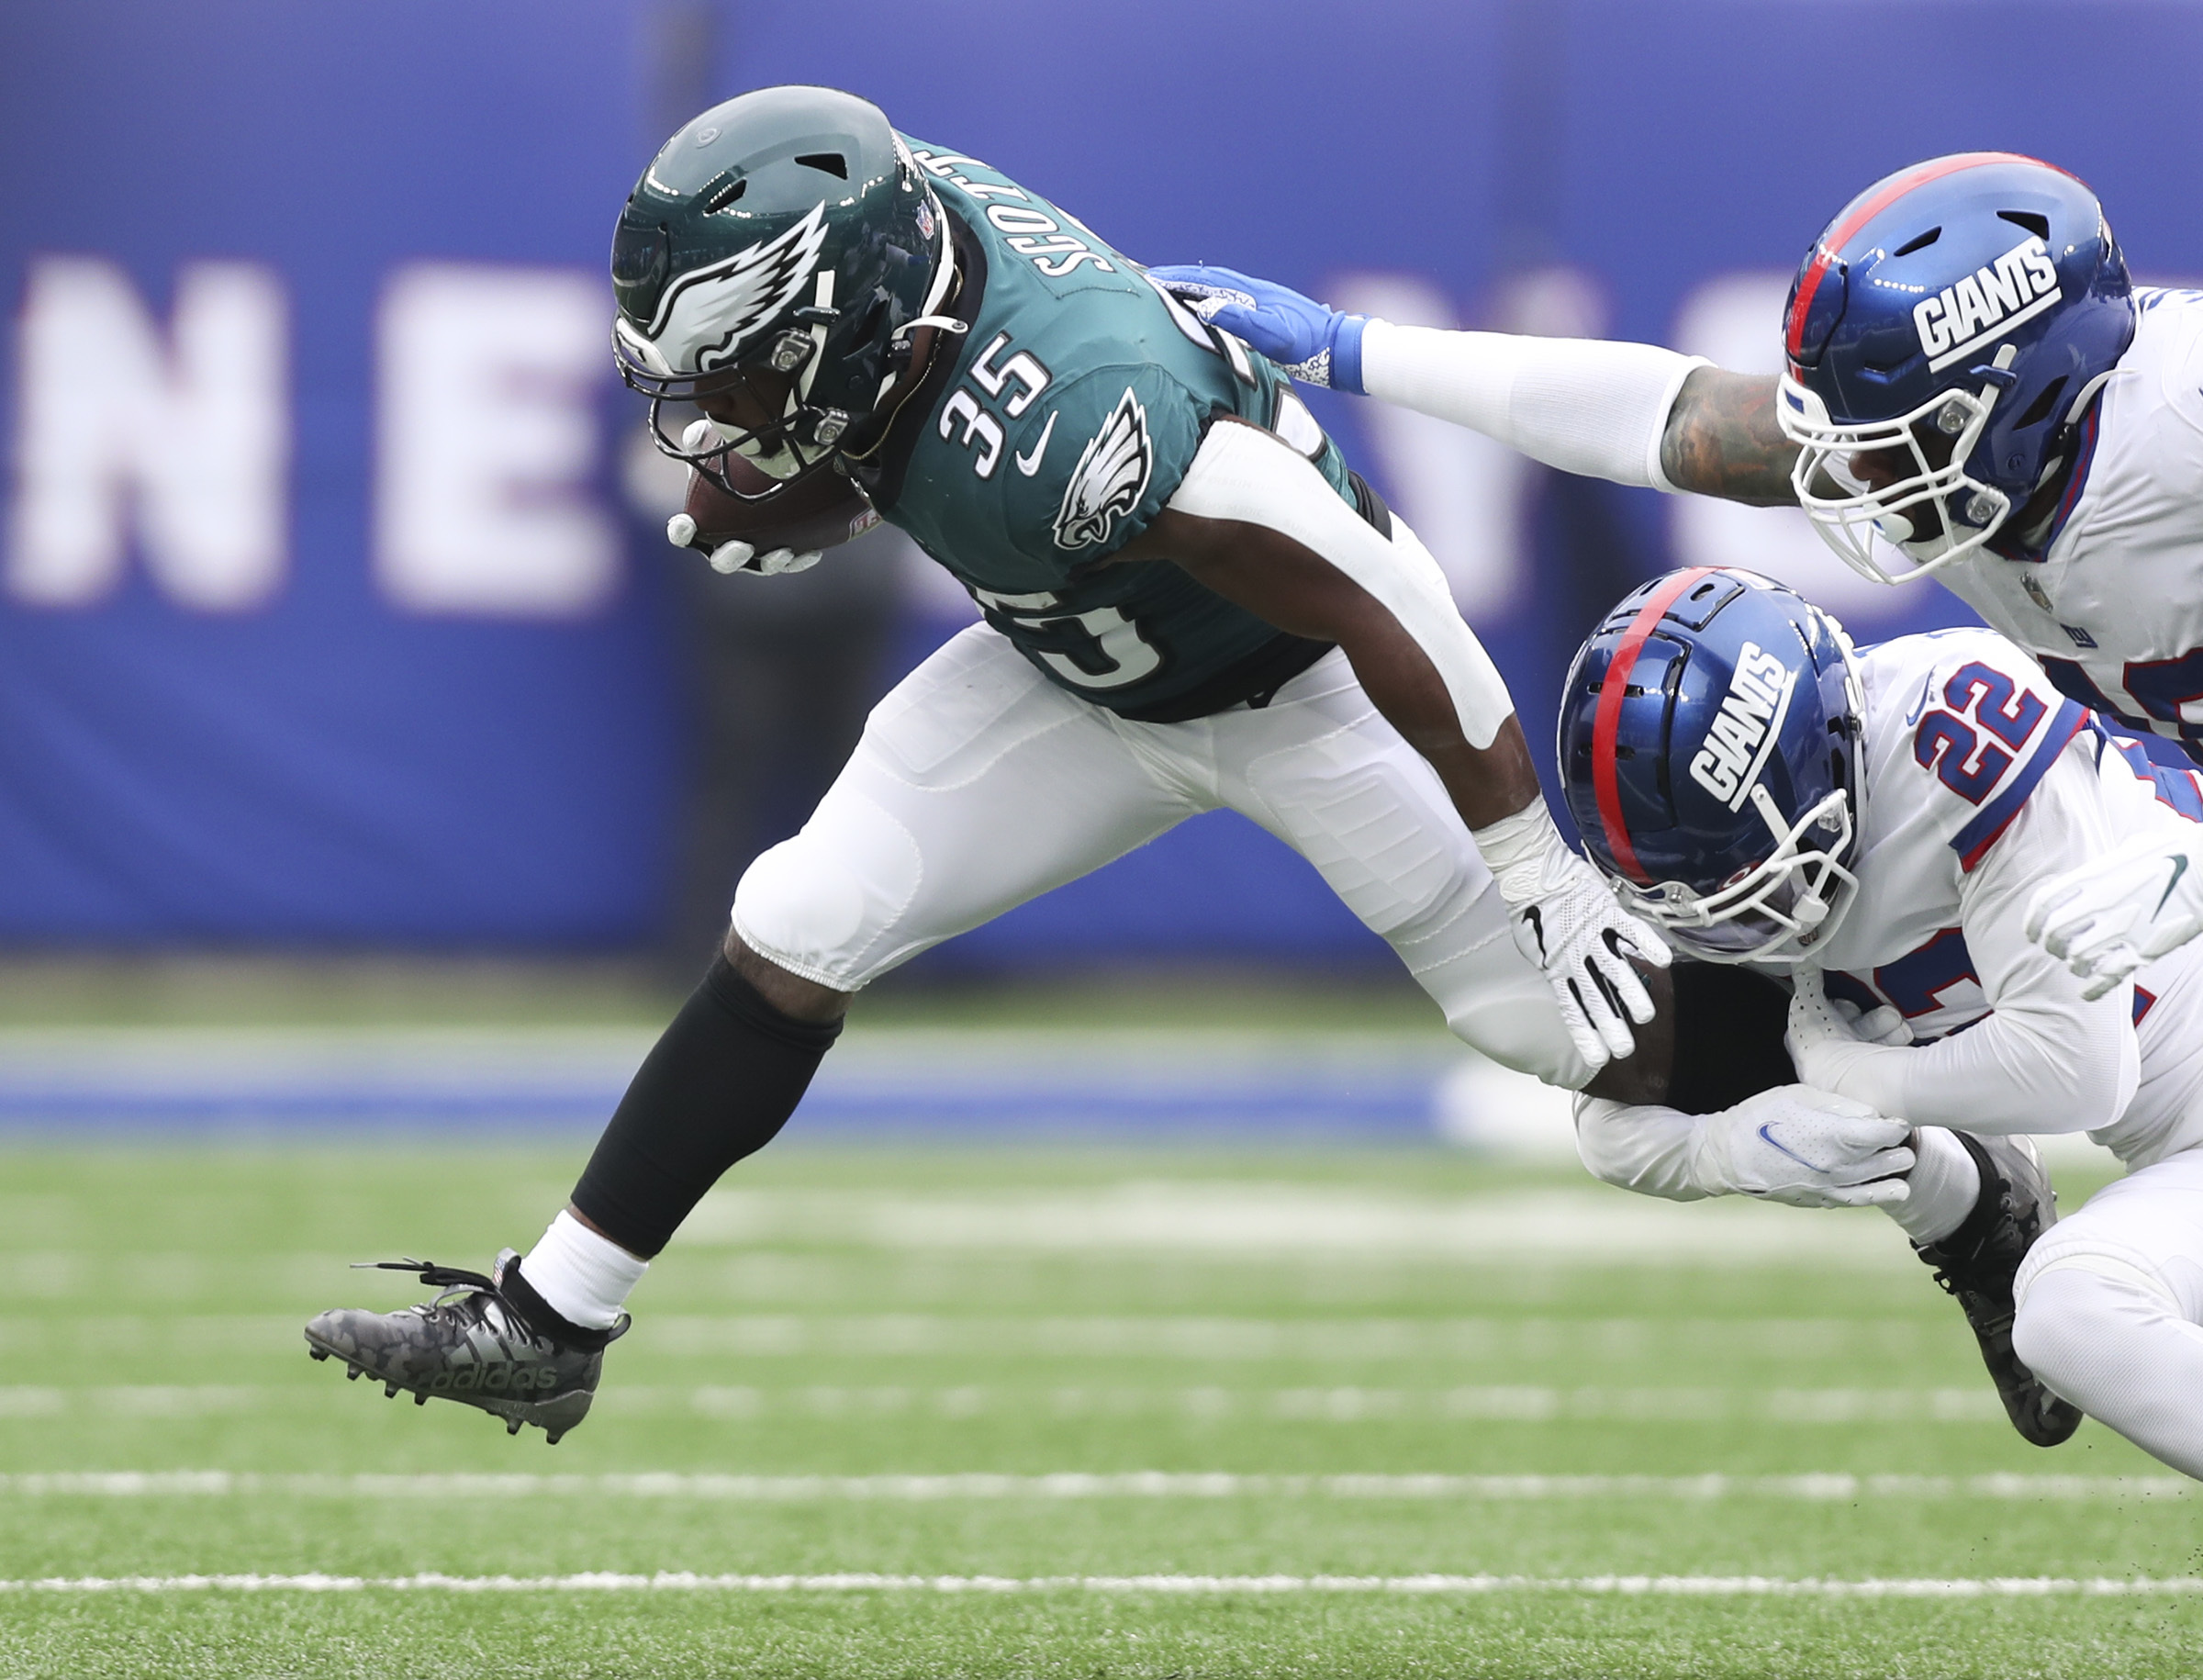 Philadelphia Eagles wide receiver DeVonta Smith (6) runs a route during an  NFL football game against the New York Giants, Sunday, Nov. 28, 2021, in  East Rutherford, N.J. The New York Giants